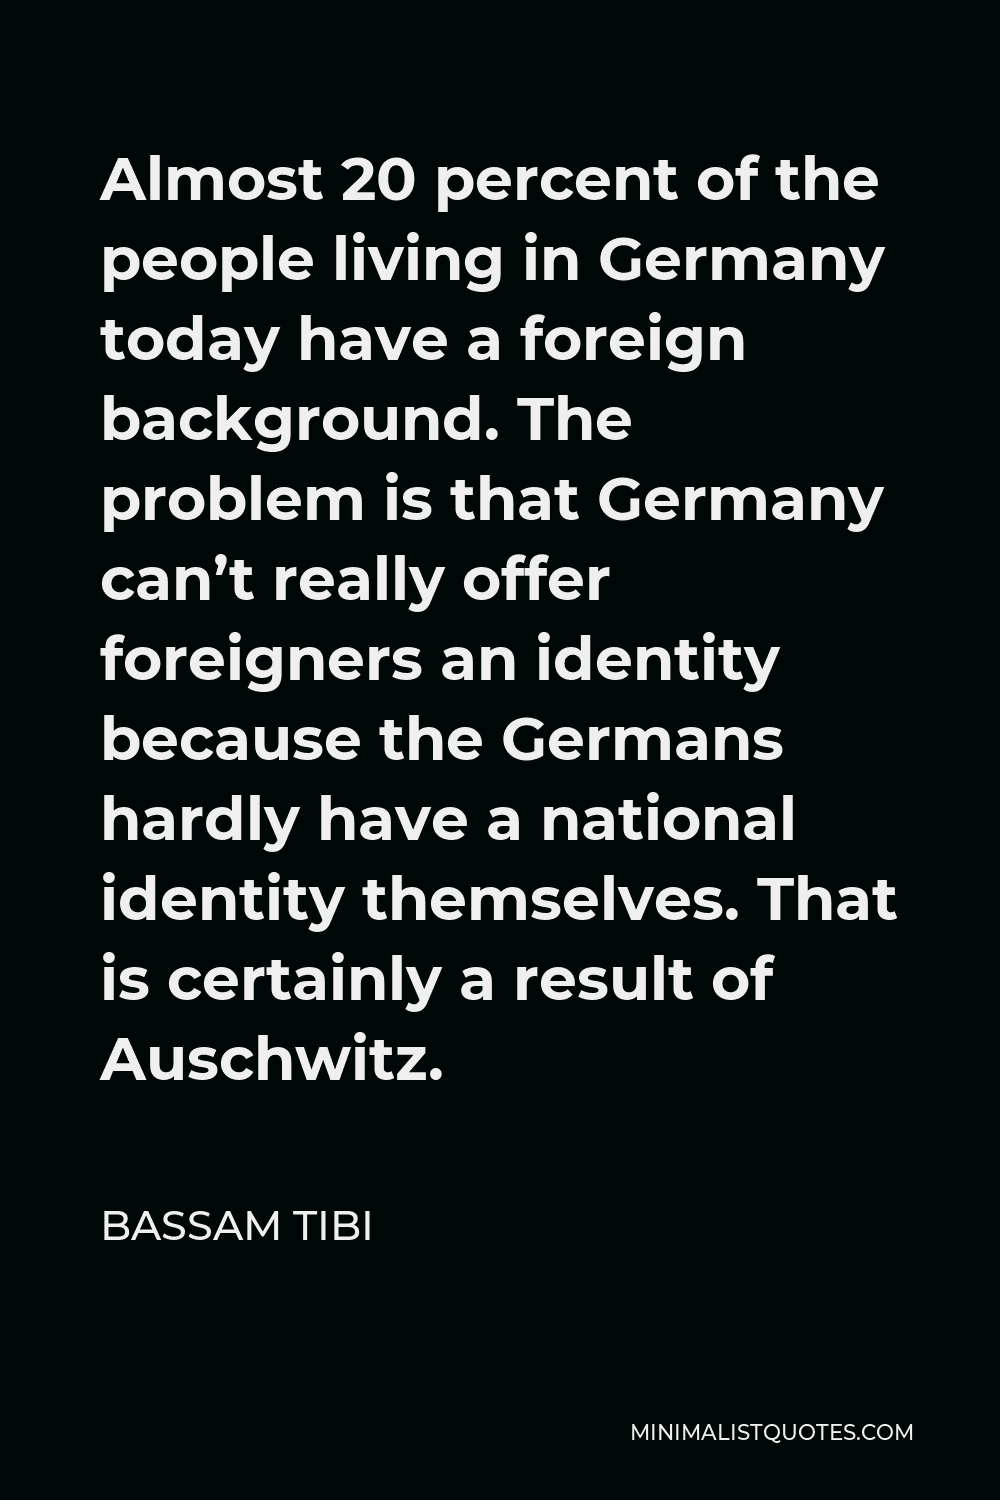 Bassam Tibi Quote - Almost 20 percent of the people living in Germany today have a foreign background. The problem is that Germany can’t really offer foreigners an identity because the Germans hardly have a national identity themselves. That is certainly a result of Auschwitz.